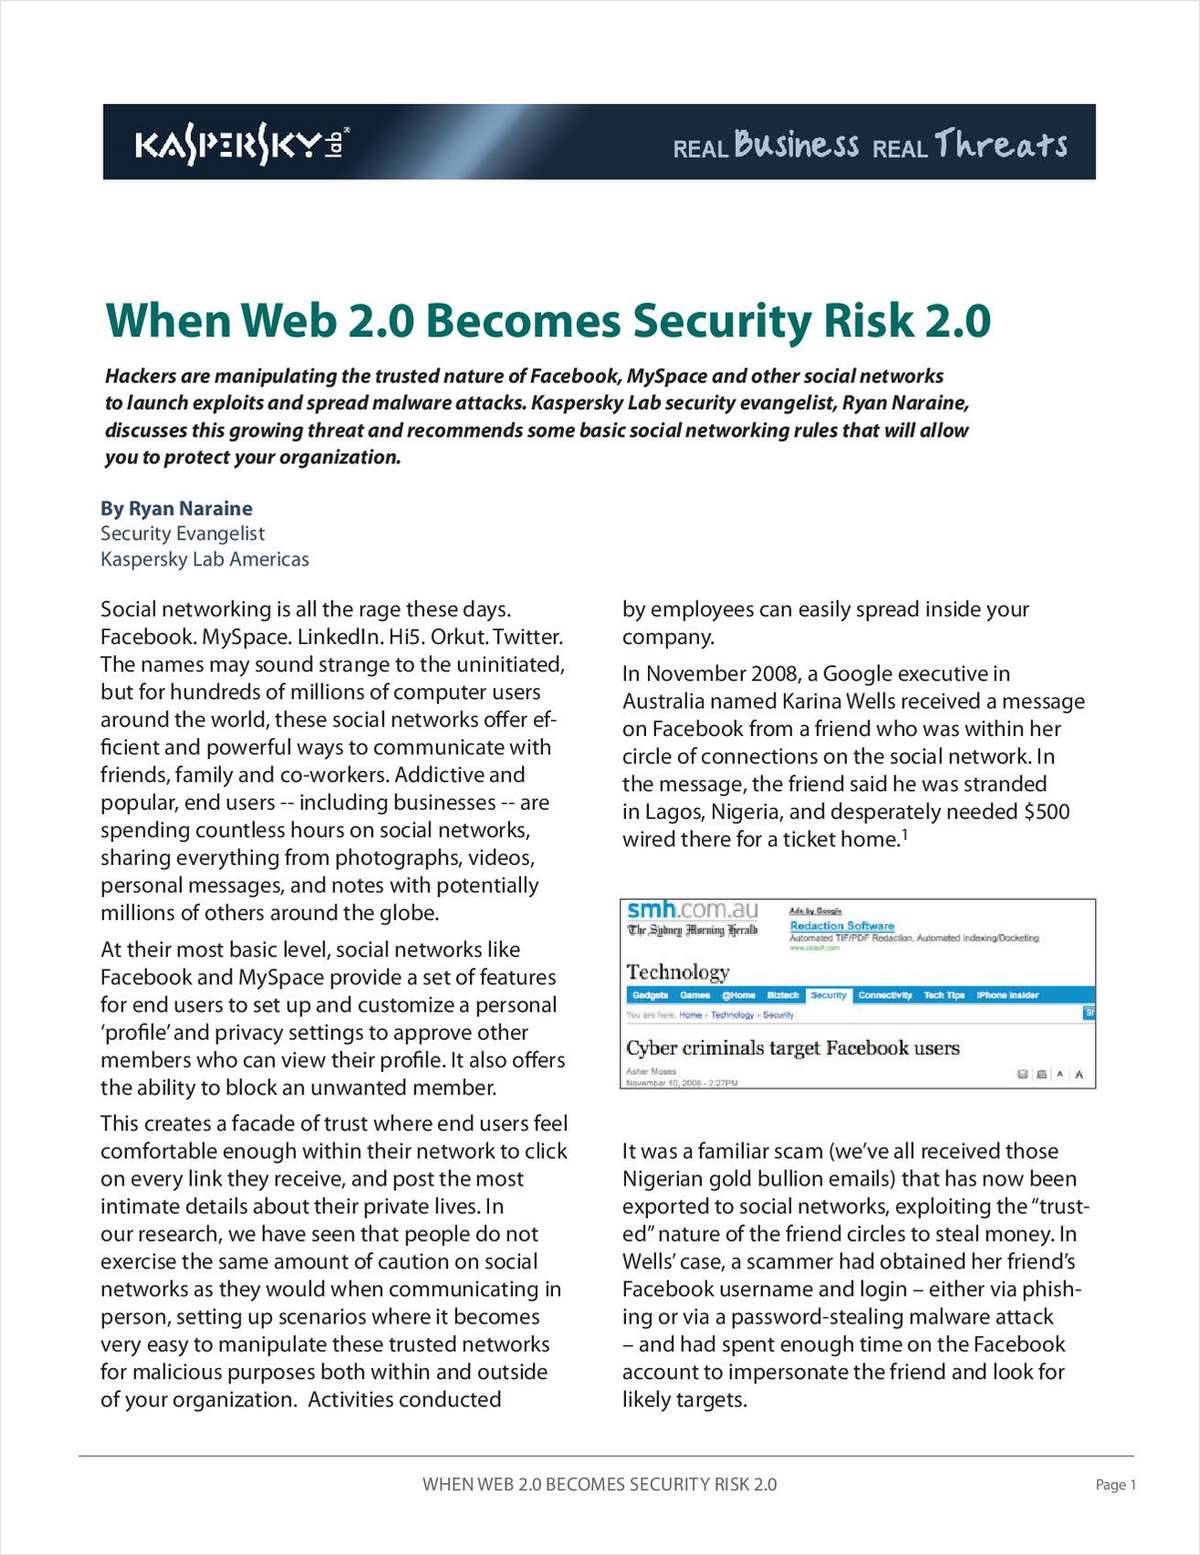 When Web 2.0 Becomes Security Risk 2.0